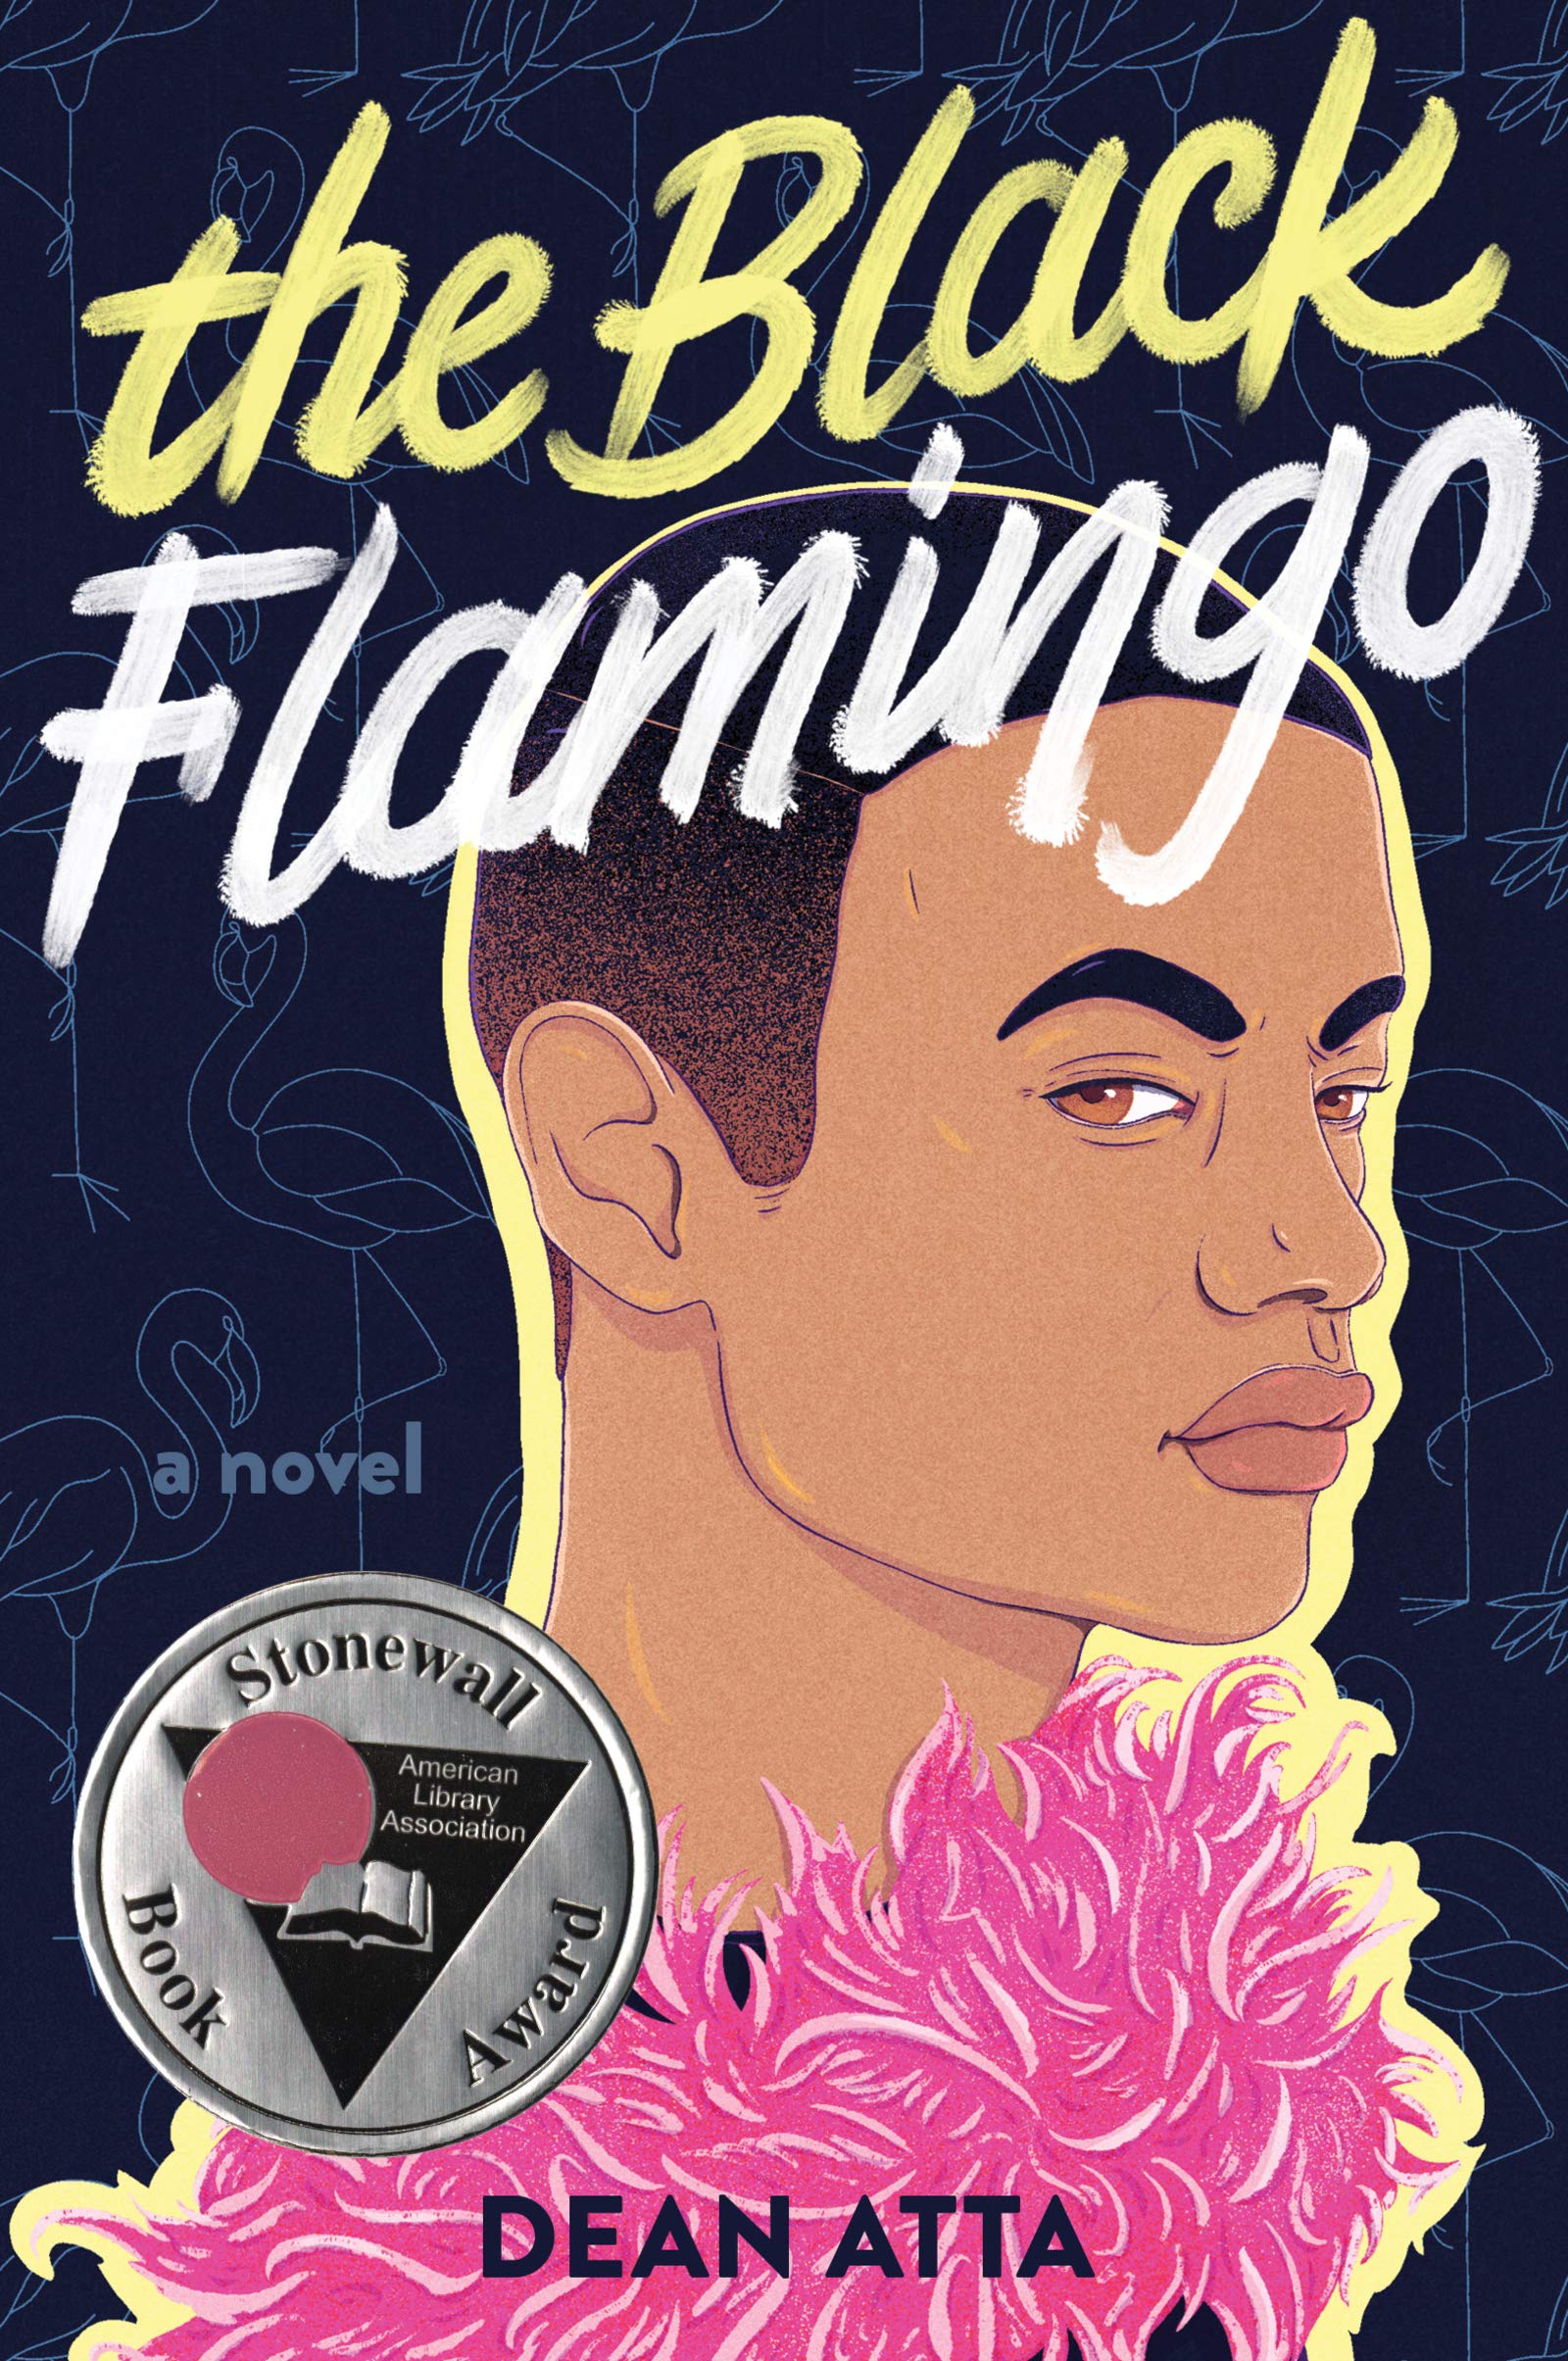 Tip for reluctant readers: Try novels written in verse like The Black Flamingo by Dean Atta